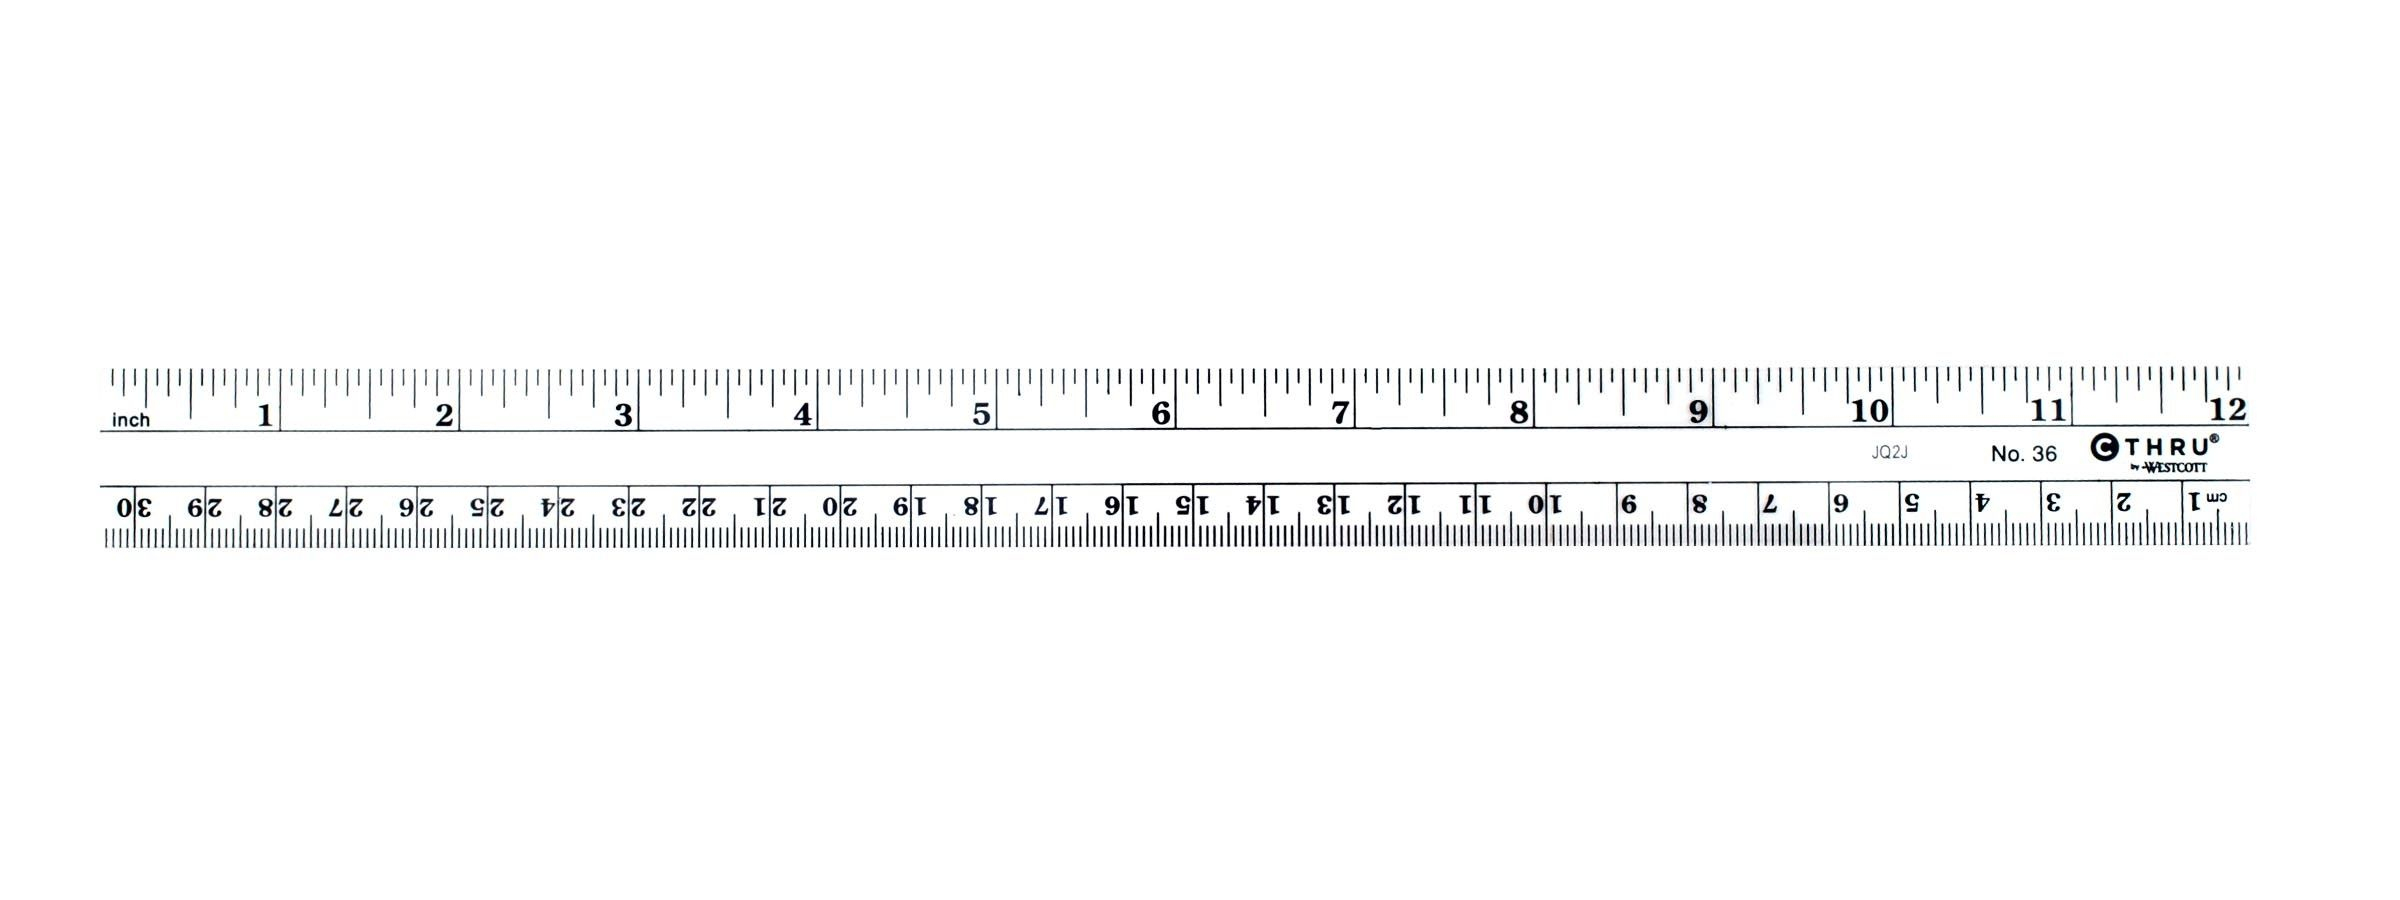 12 Inch Ruler Clipart Black And White